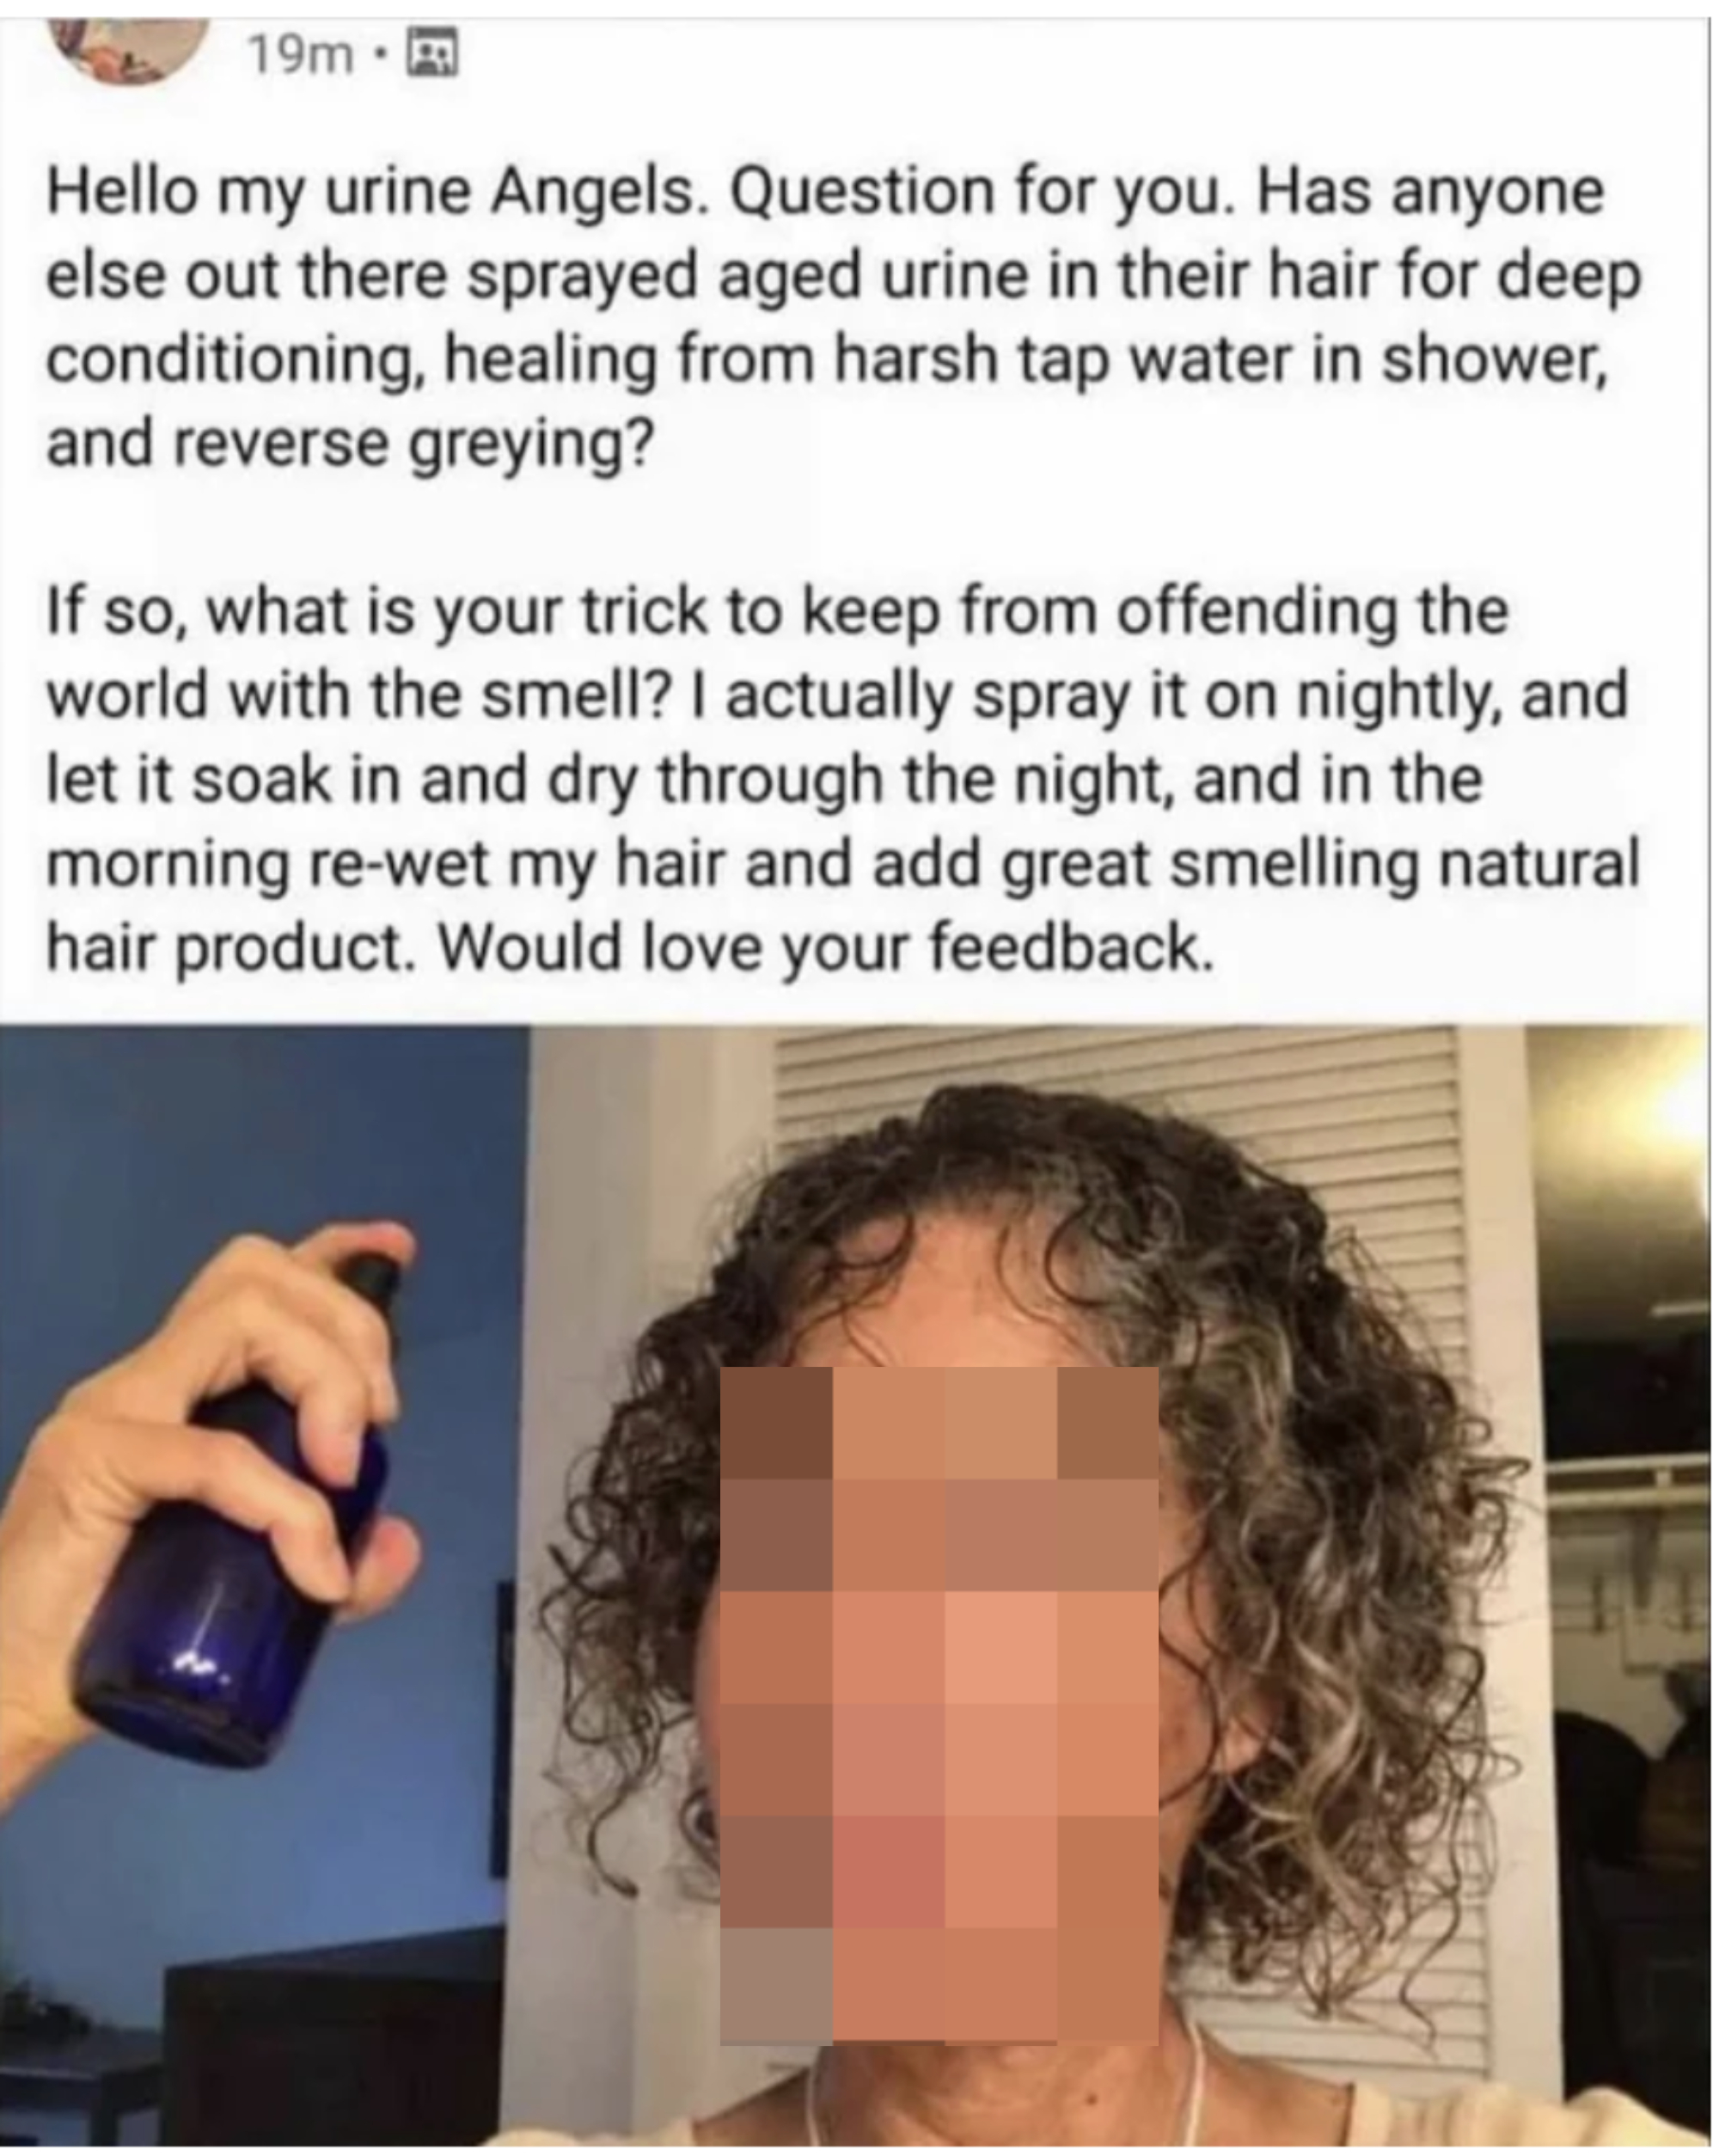 Someone asking her community if they&#x27;ve sprayed aged urine in their hair, accompanied by a photo of her spraying a bottle on her hair